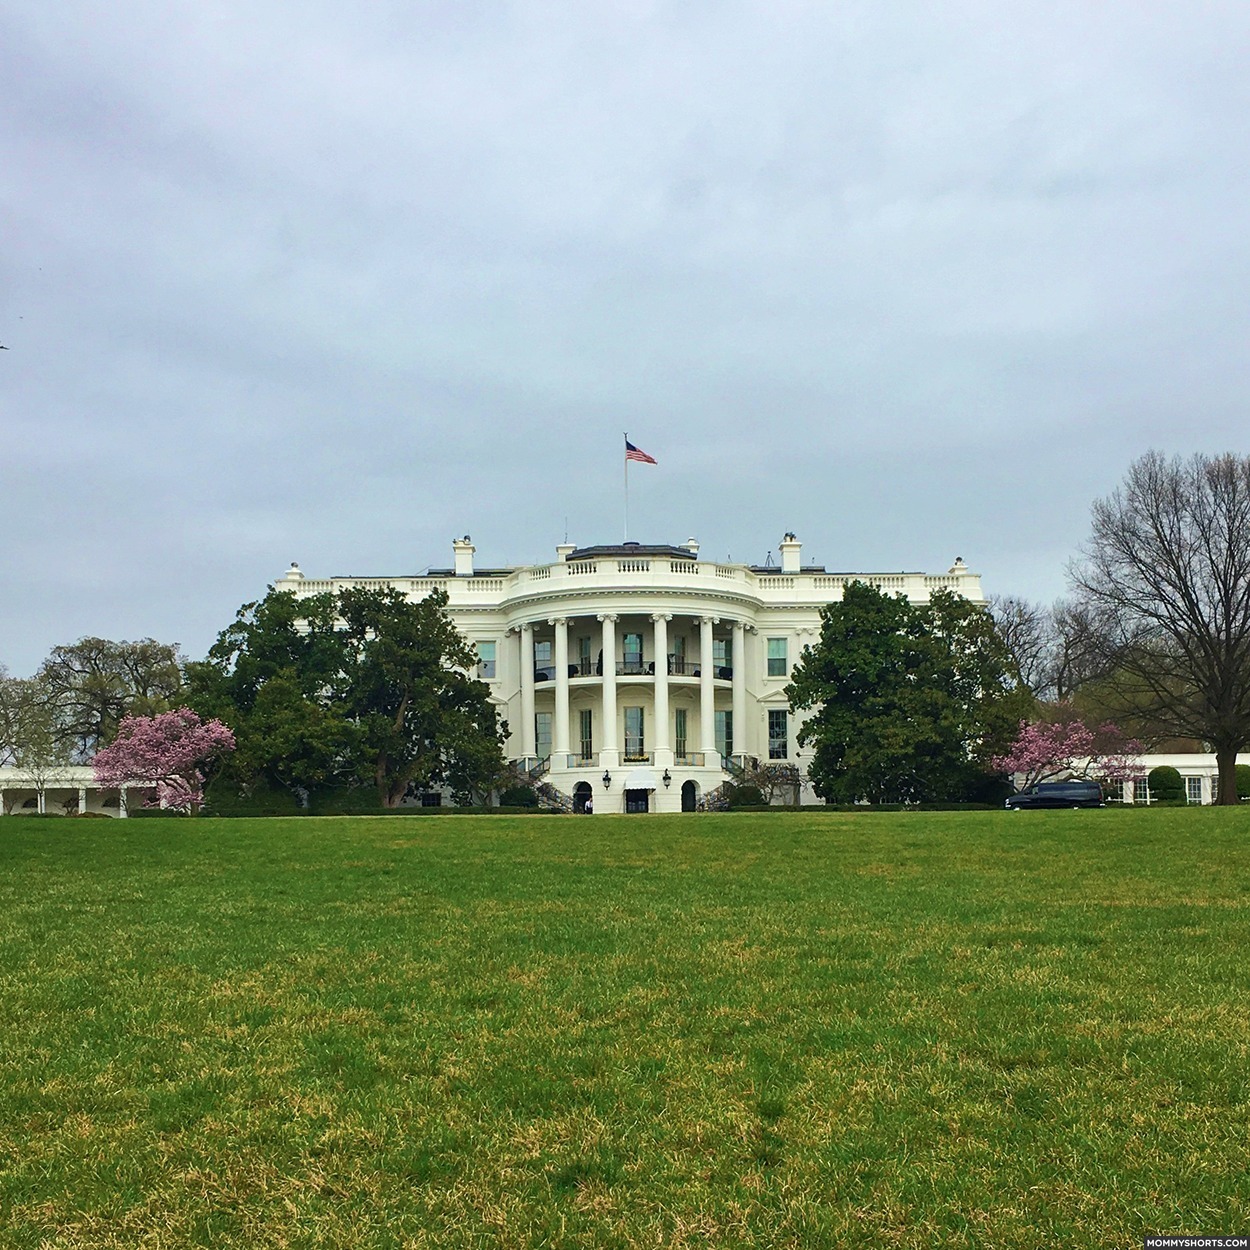 A Visit to the White House